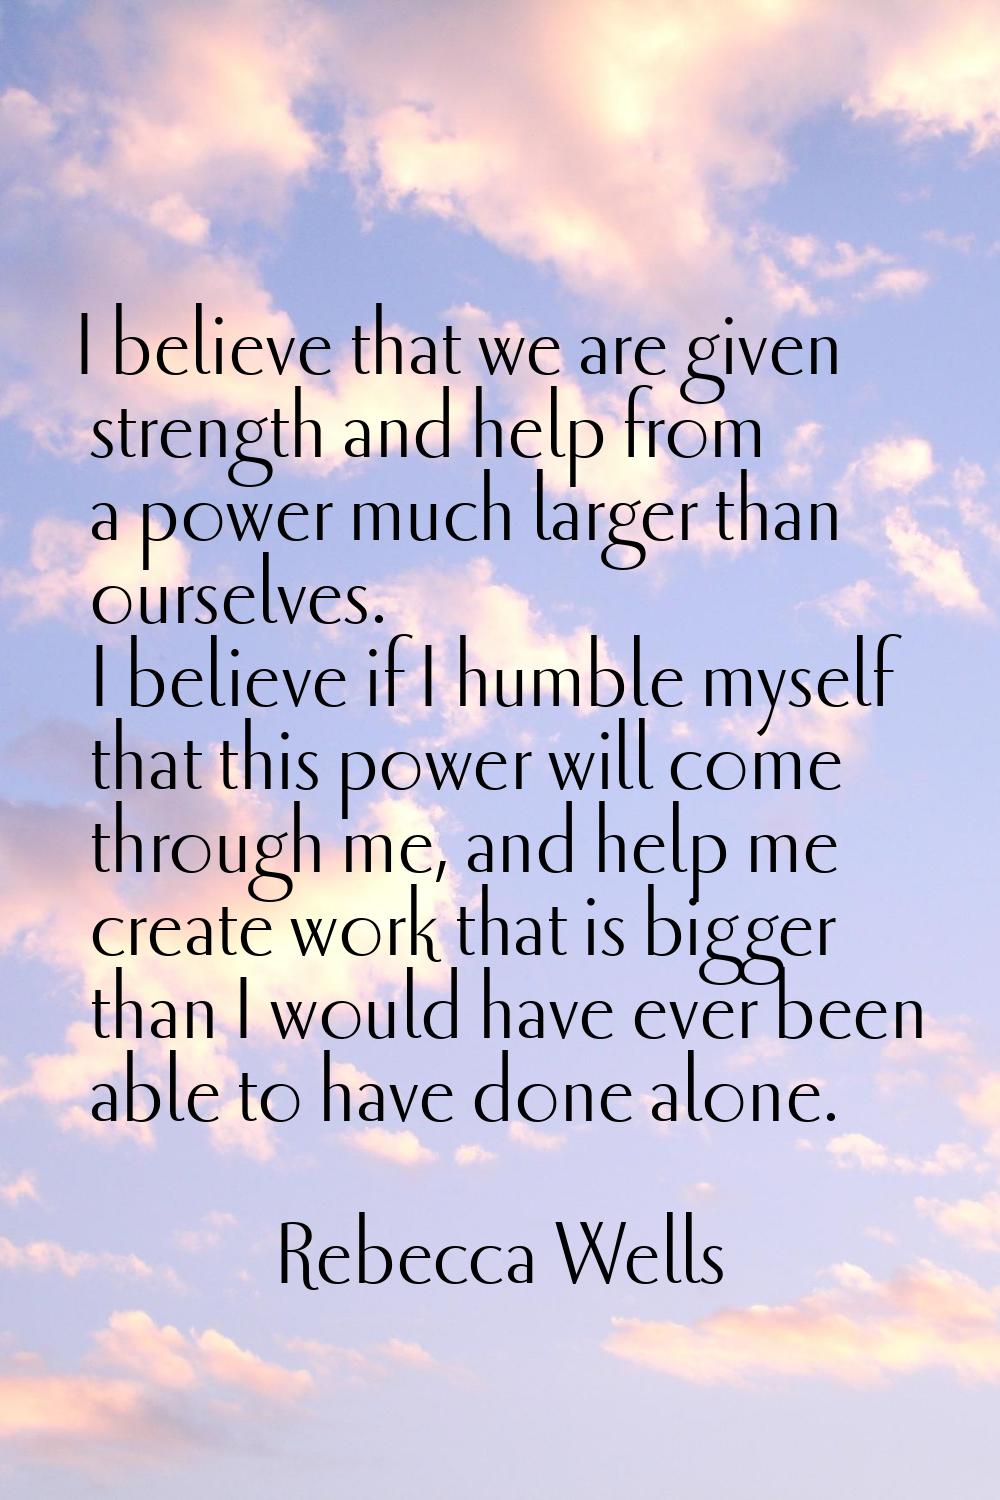 I believe that we are given strength and help from a power much larger than ourselves. I believe if